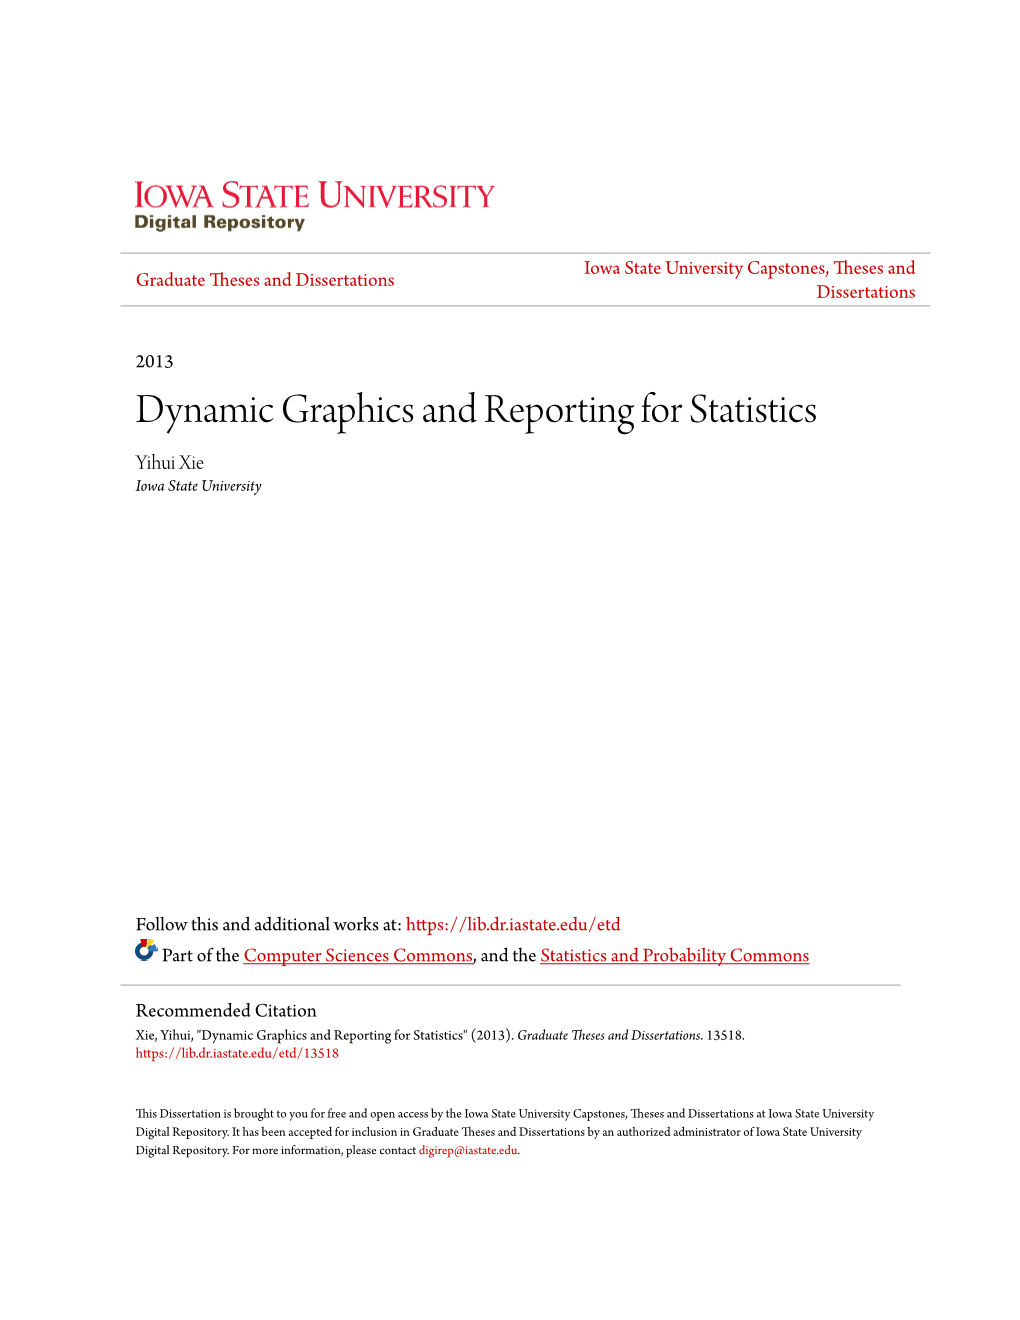 Dynamic Graphics and Reporting for Statistics Yihui Xie Iowa State University